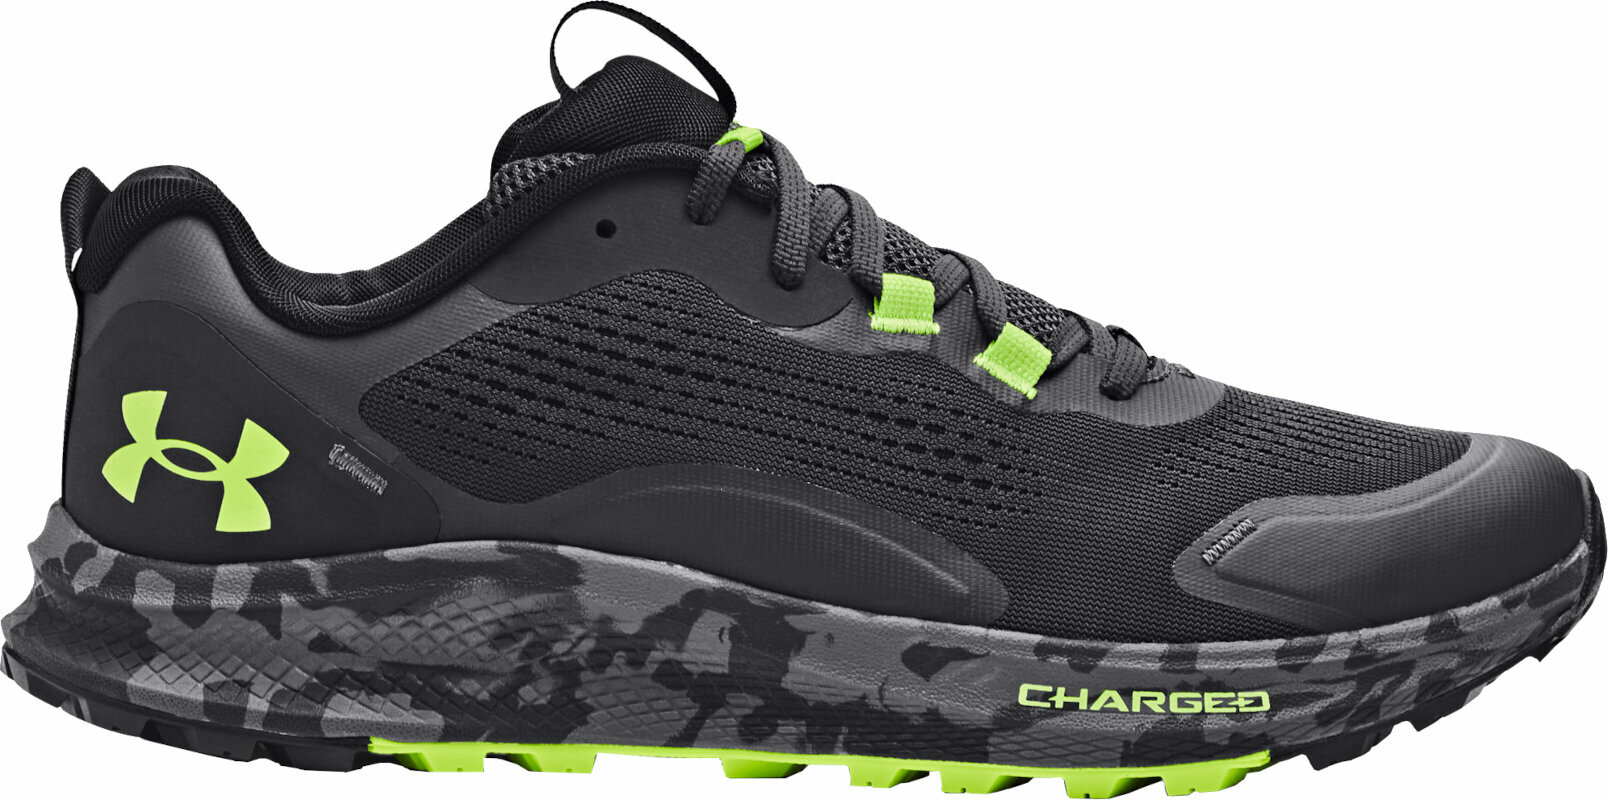 Under Armour Men's UA Charged Bandit Trail 2 Running Shoes Jet Gray/Black/Lime Surge 41